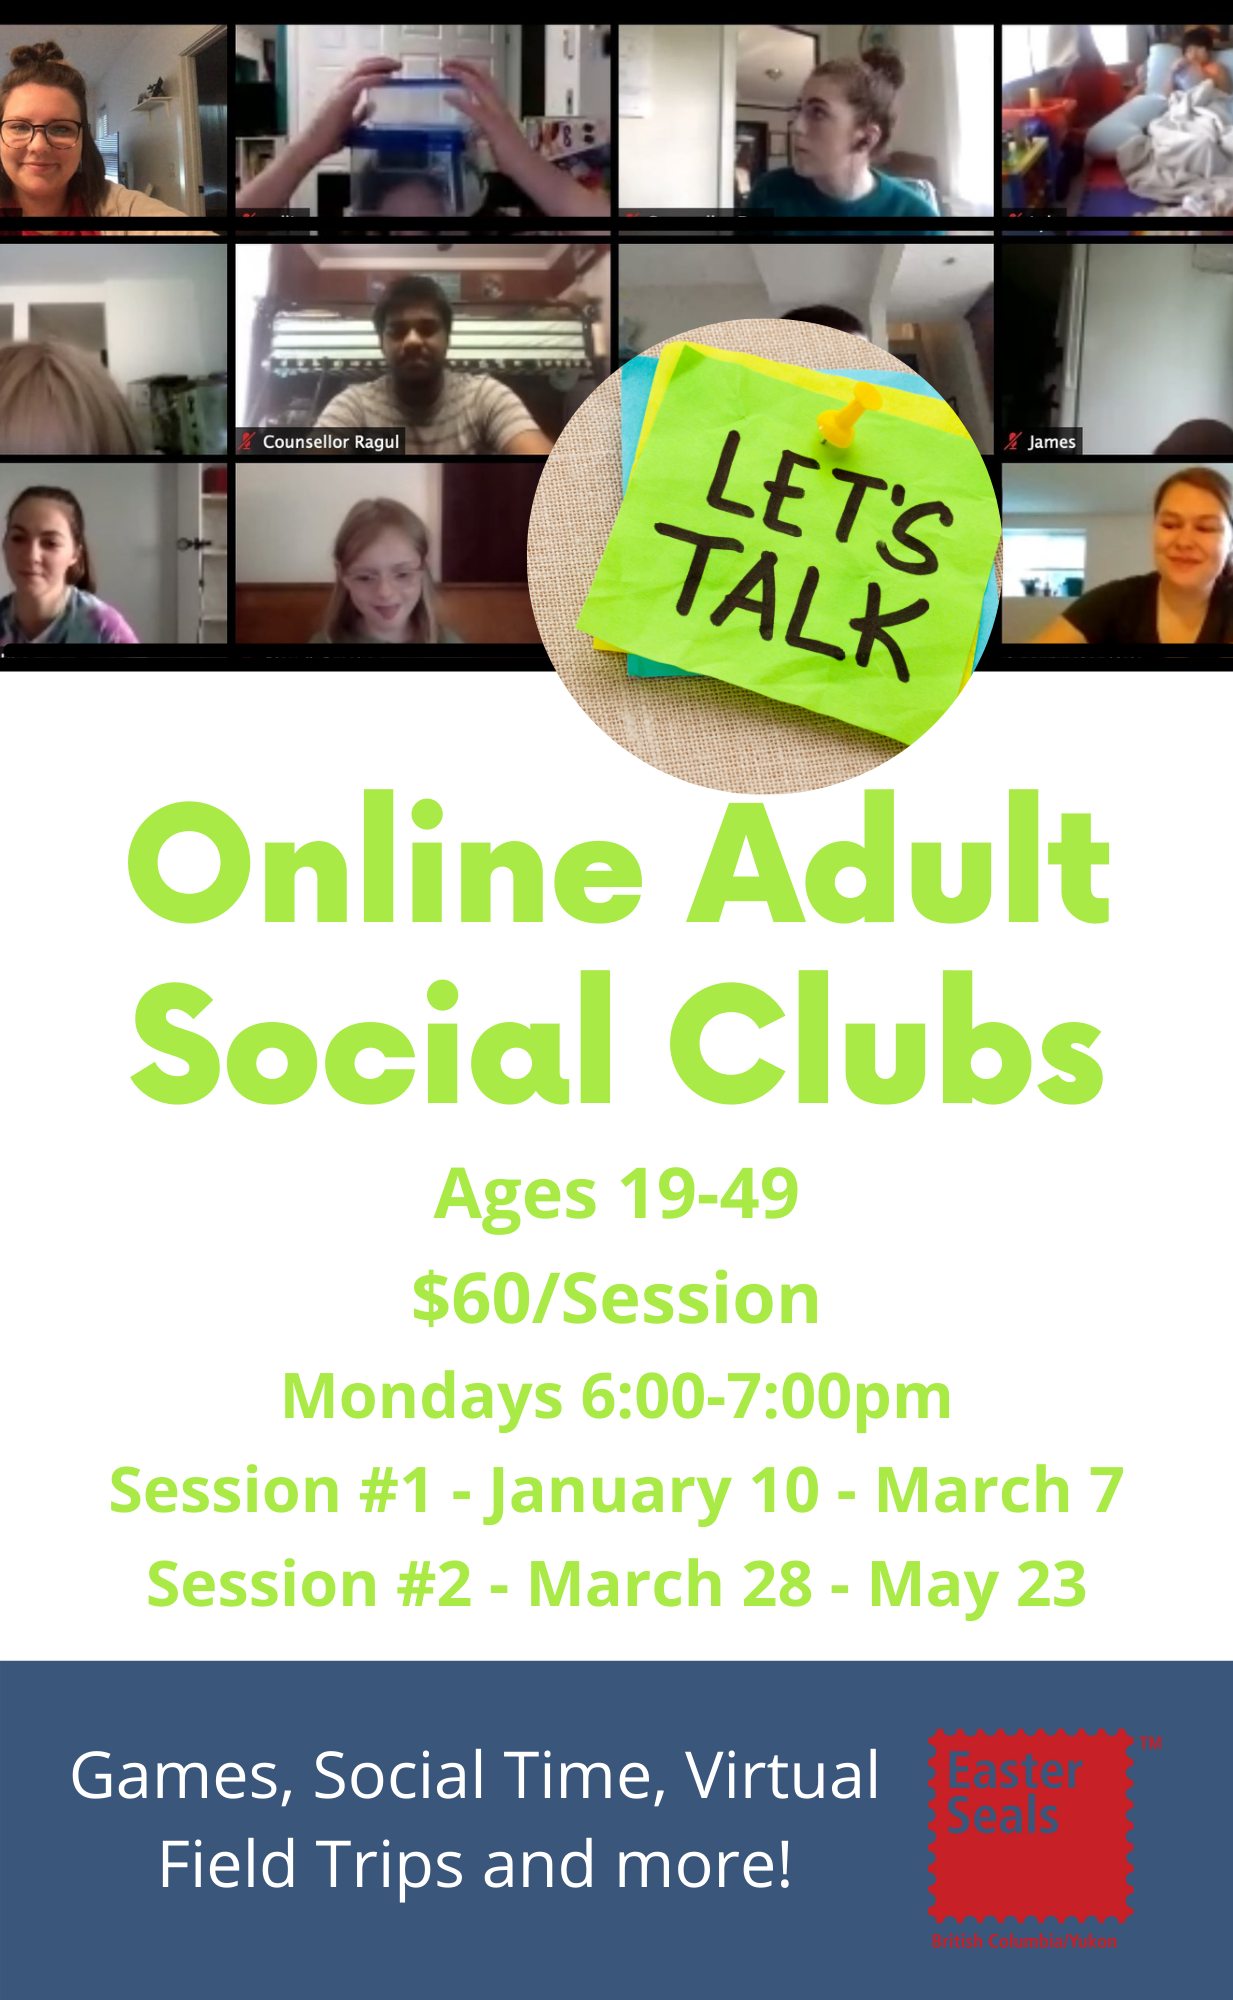 Online Adult Social Clubs - Winter Session